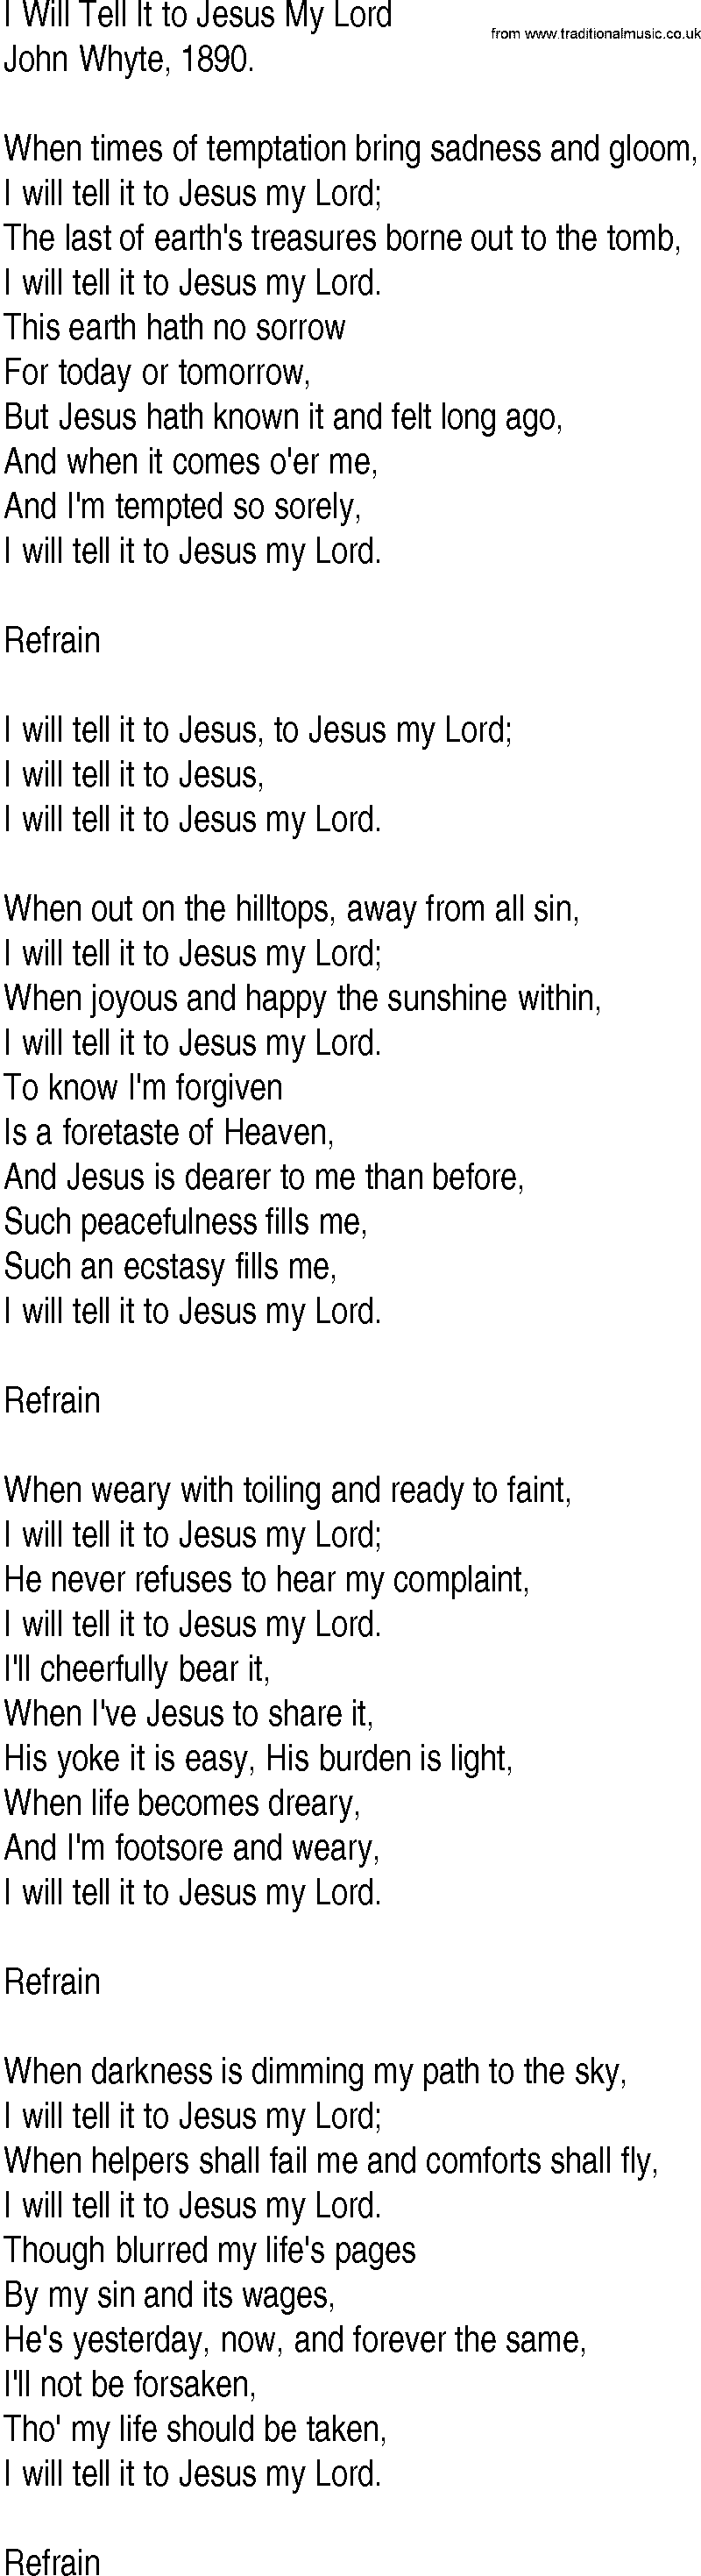 Hymn and Gospel Song: I Will Tell It to Jesus My Lord by John Whyte lyrics